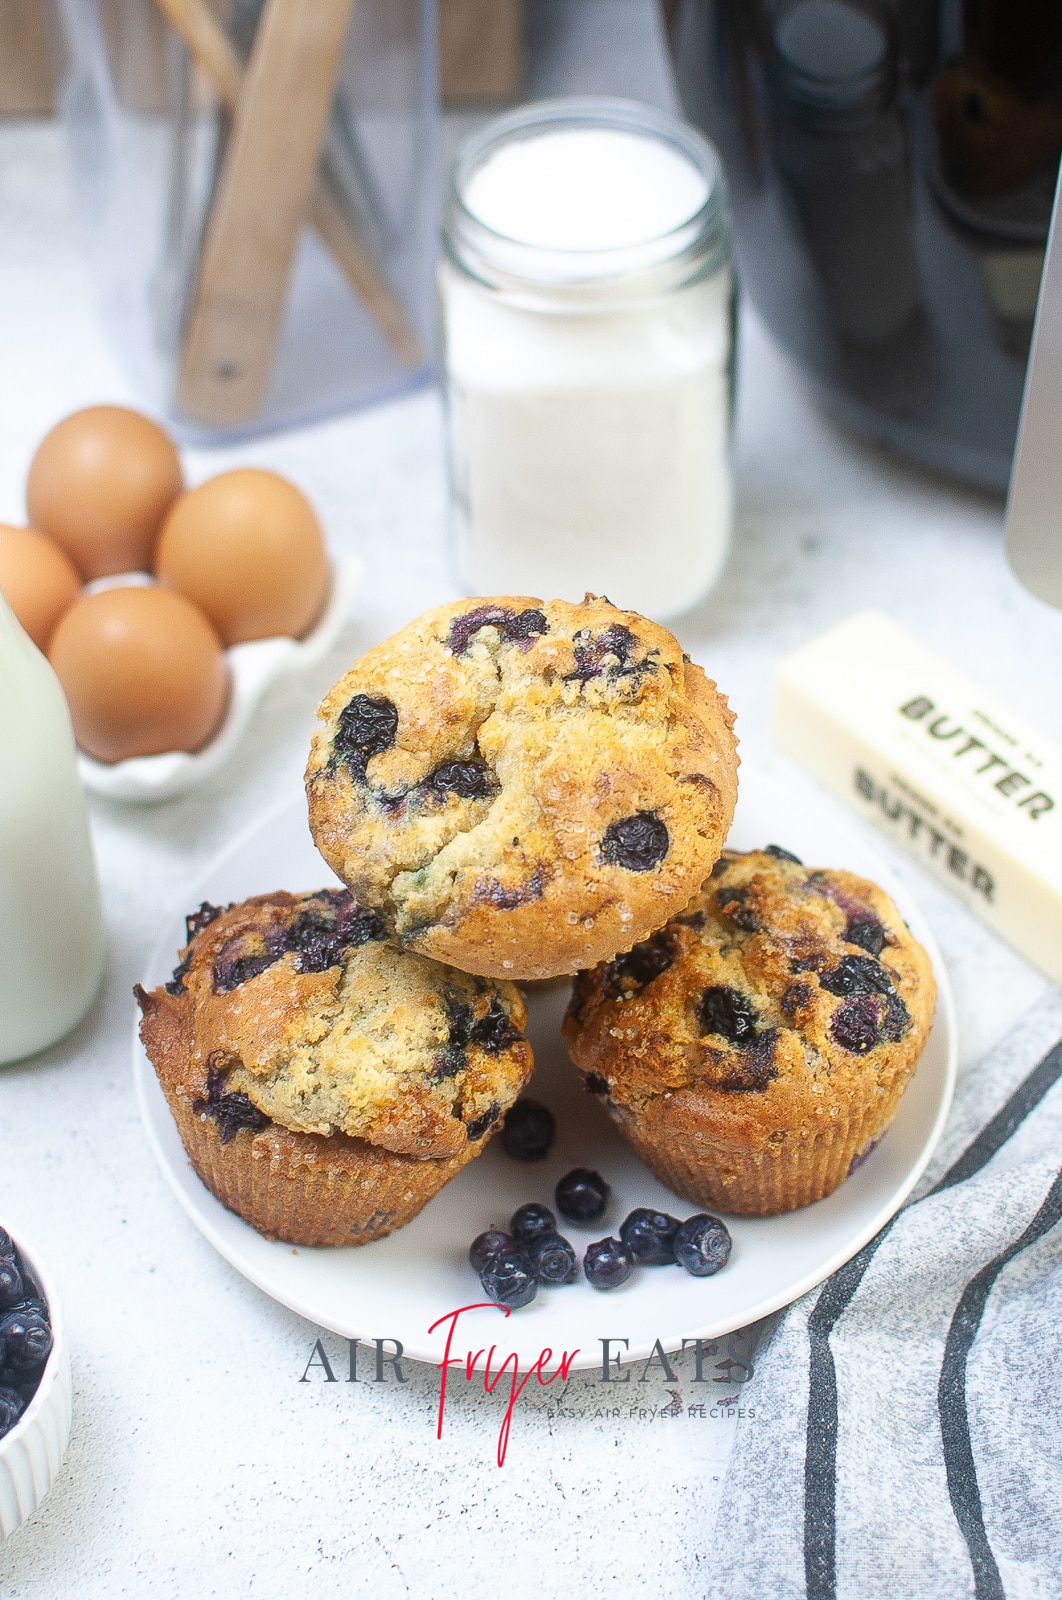 vertical photo showing a white plate with four air fryer blueberry muffins, with sugar, butter, eggs, milk and blueberries around the plate. All on a white surface